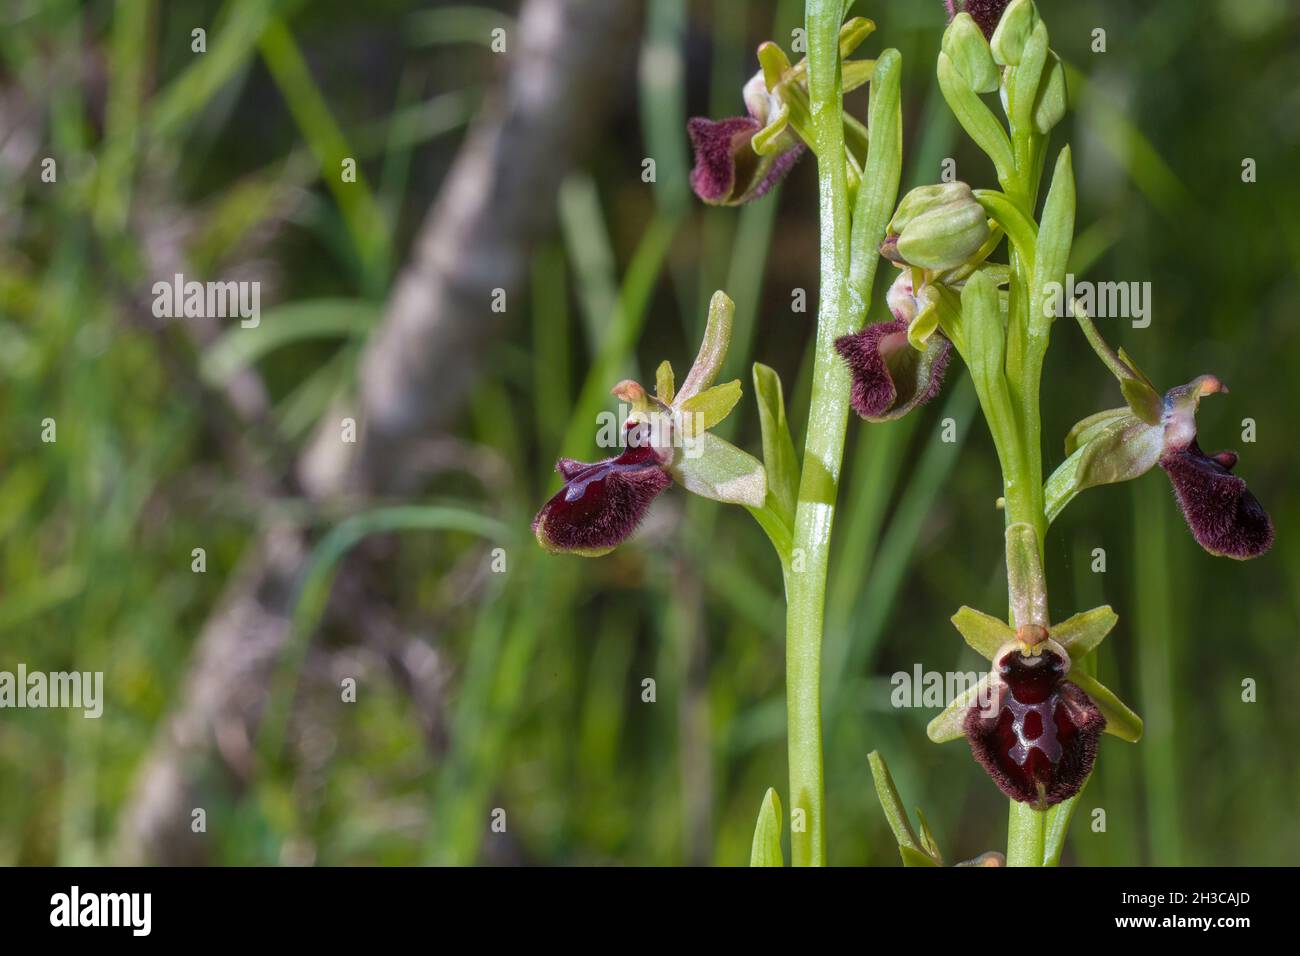 Beautiful wild rare orchid Ophrys sphegodes also known as early spider-orchid. Valverde de Leganes, Extremadura, Spain Stock Photo